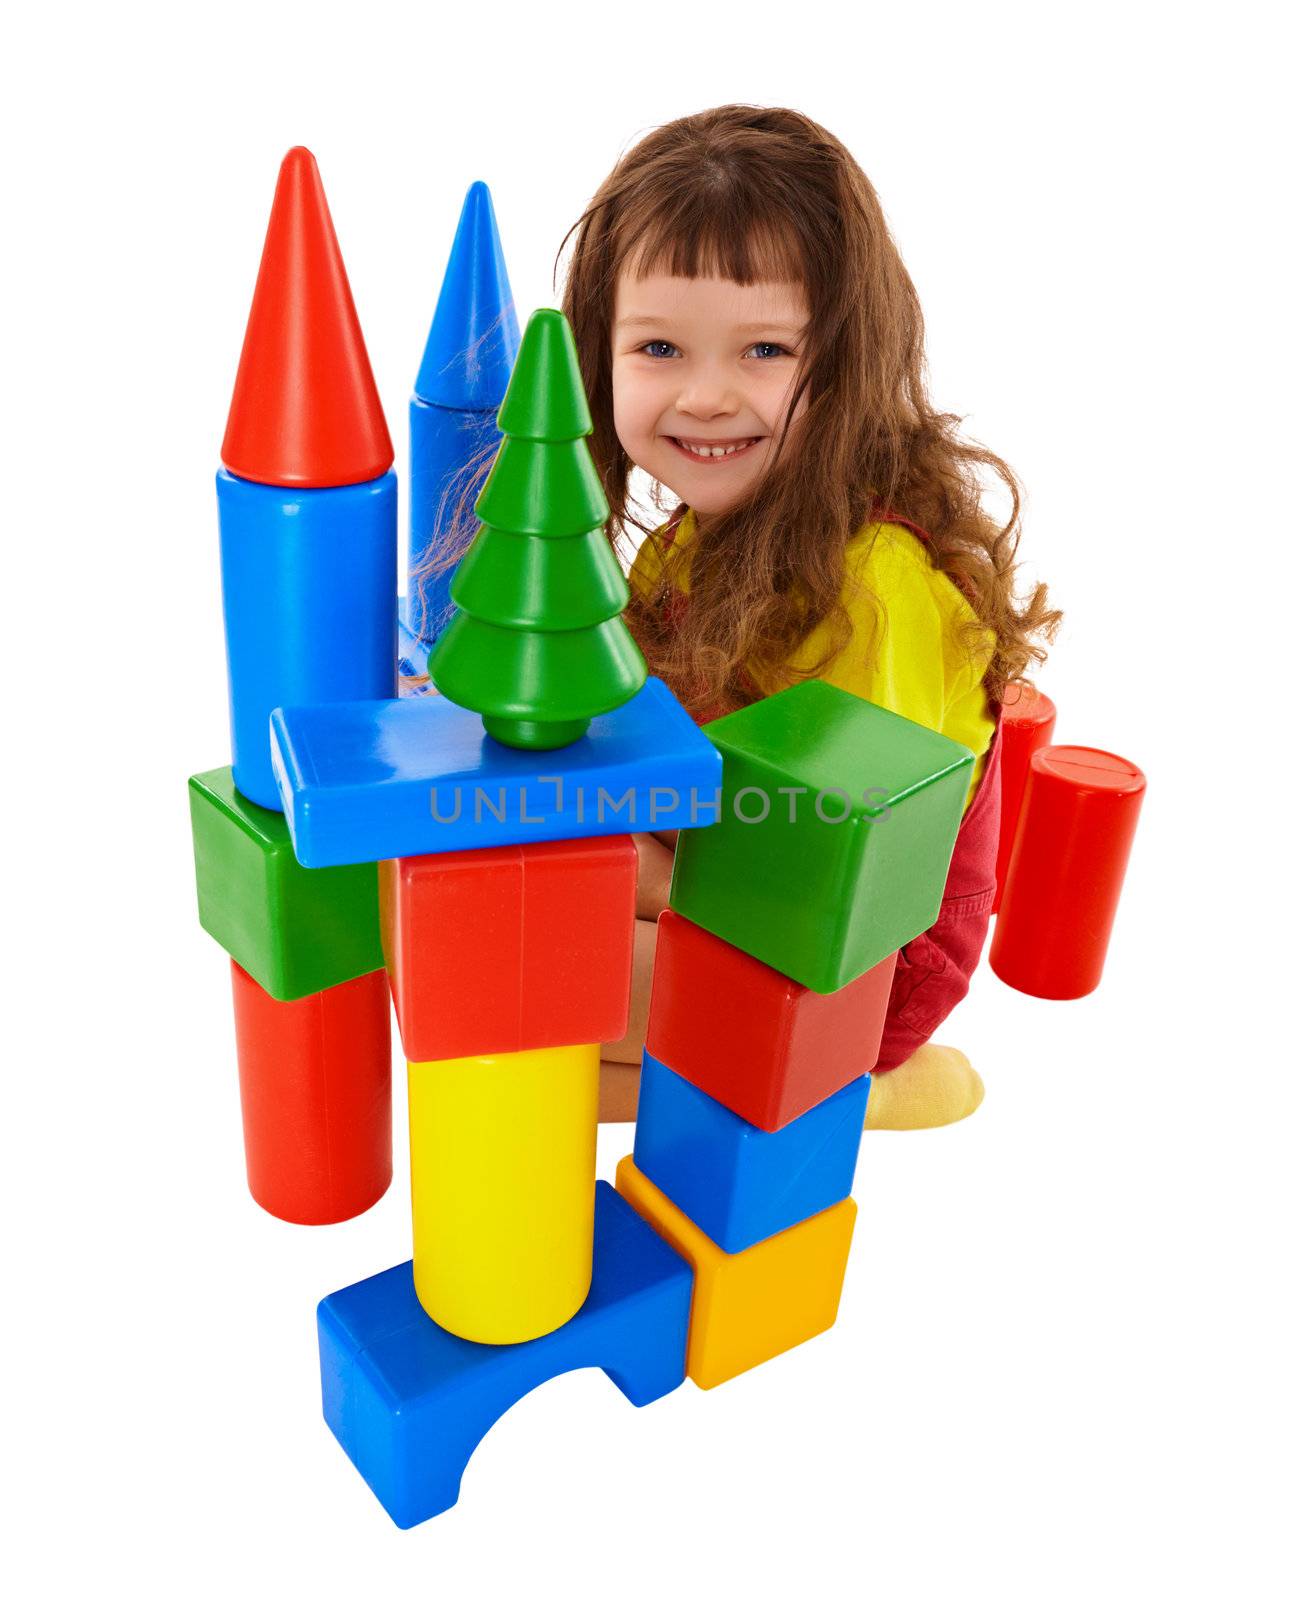 Small child built a castle from color cubes isolated on white background